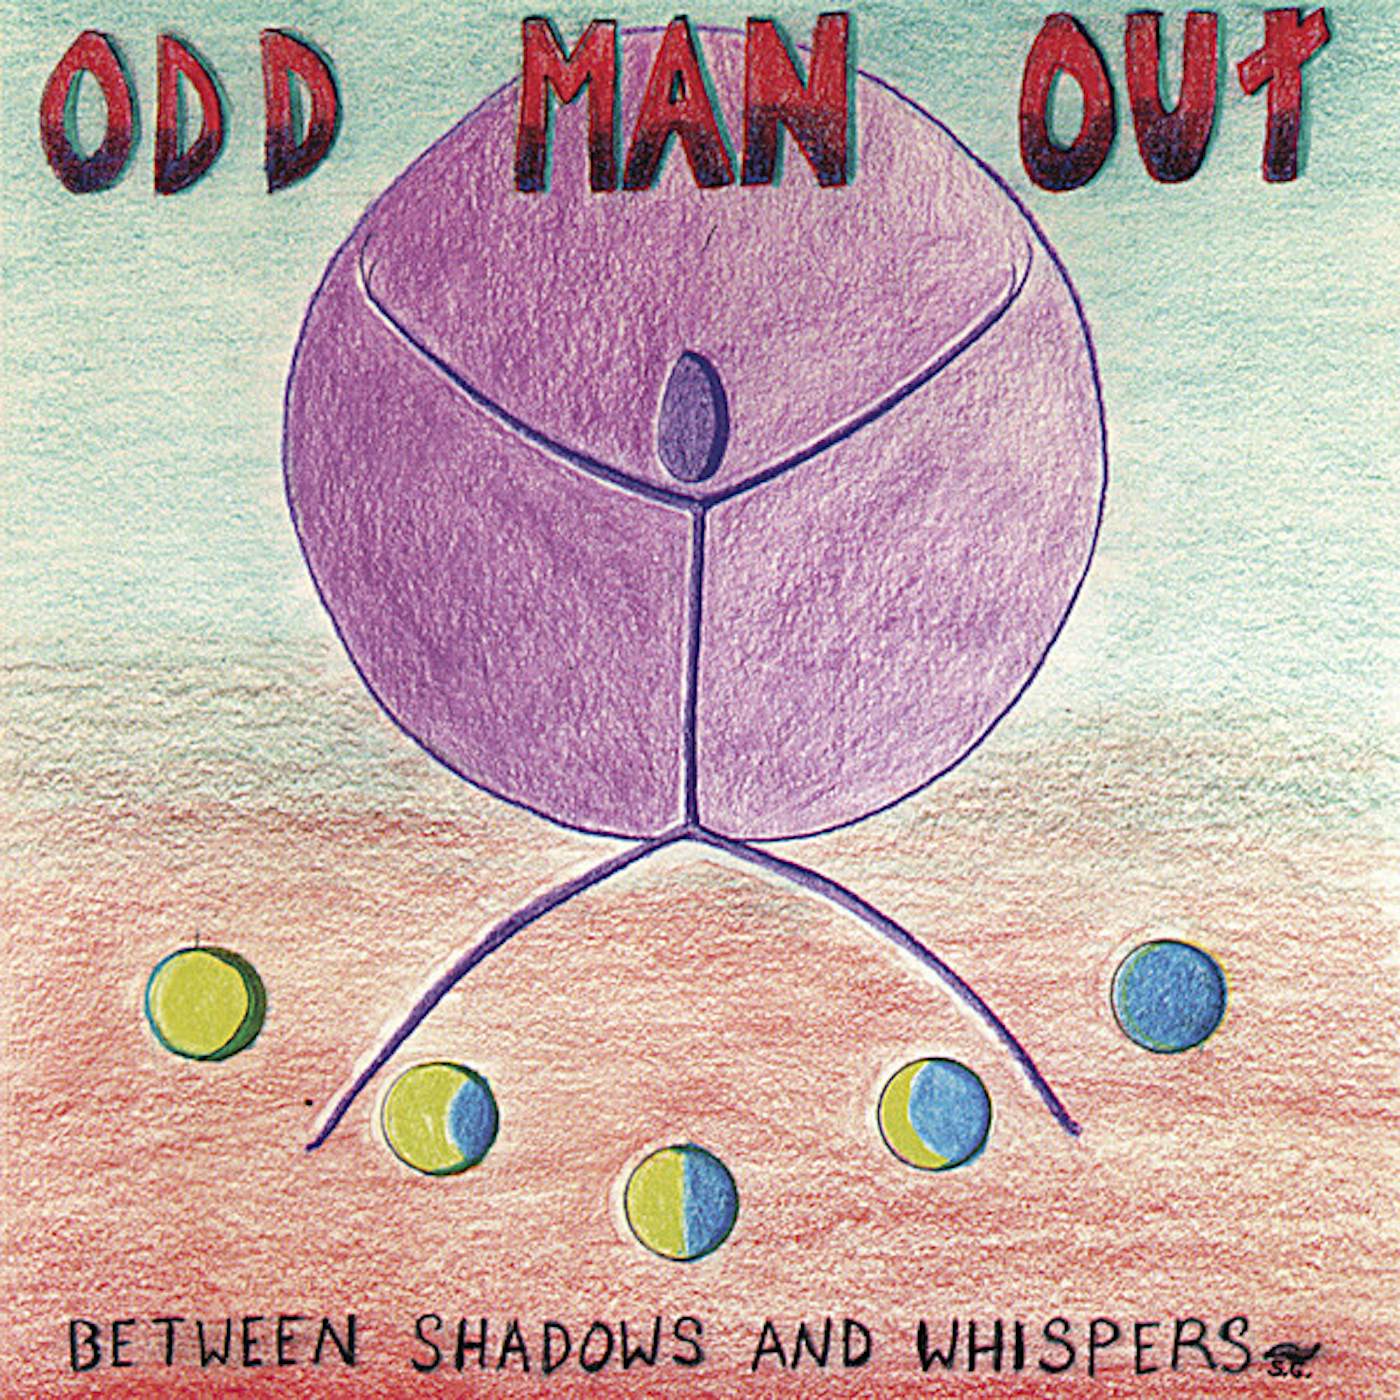 Odd Man Out BETWEEN SHADOWS & WHISPERS CD